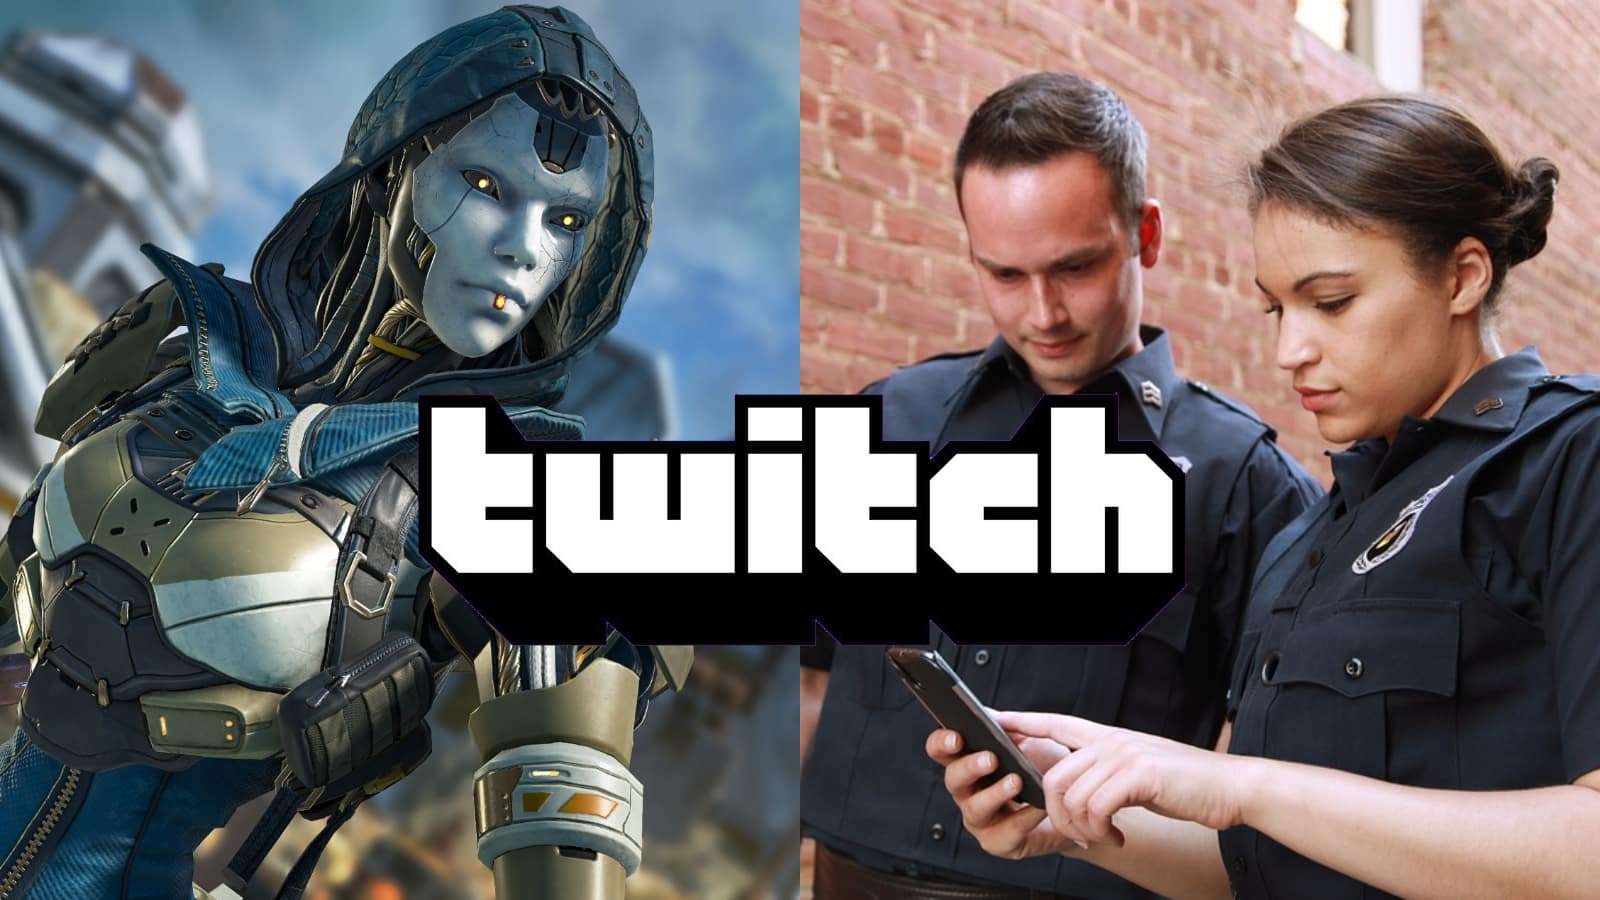 Twitch streamer confronted by cops during apex legends broadcast